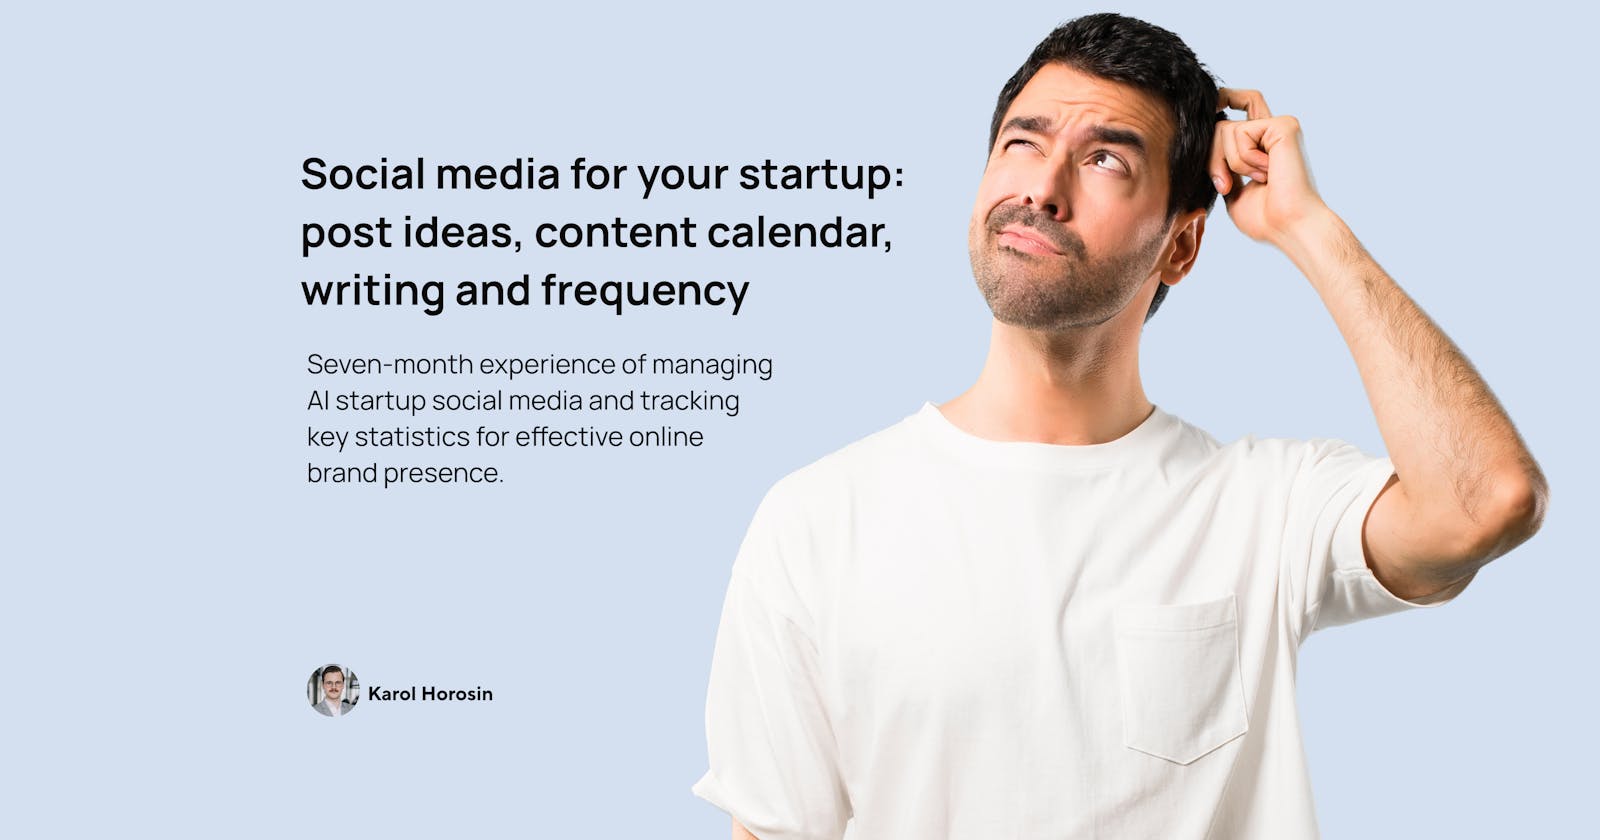 Social media for your startup: post ideas, content calendar, writing, frequency